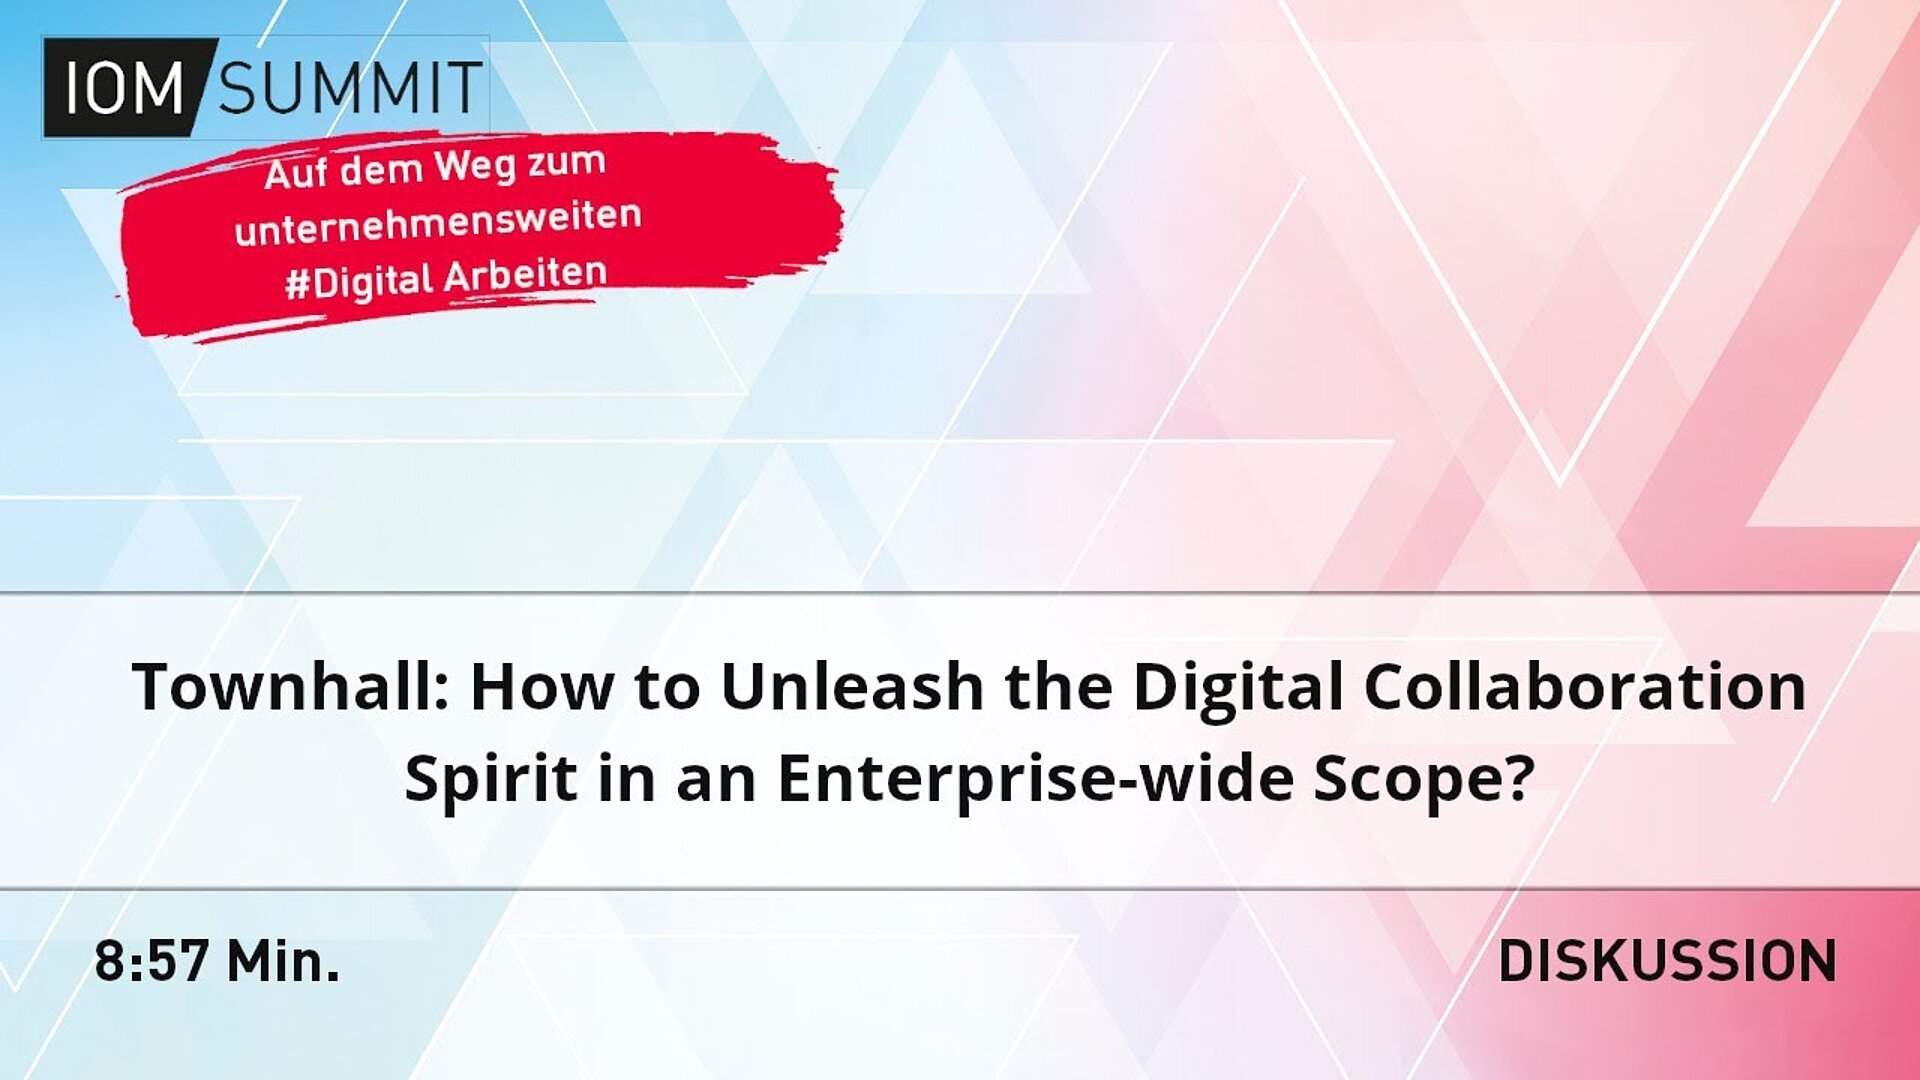 Virtuelle Townhall: How to Unleash the Digital Collaboration Spirit in an Enterprise-wide Scope?